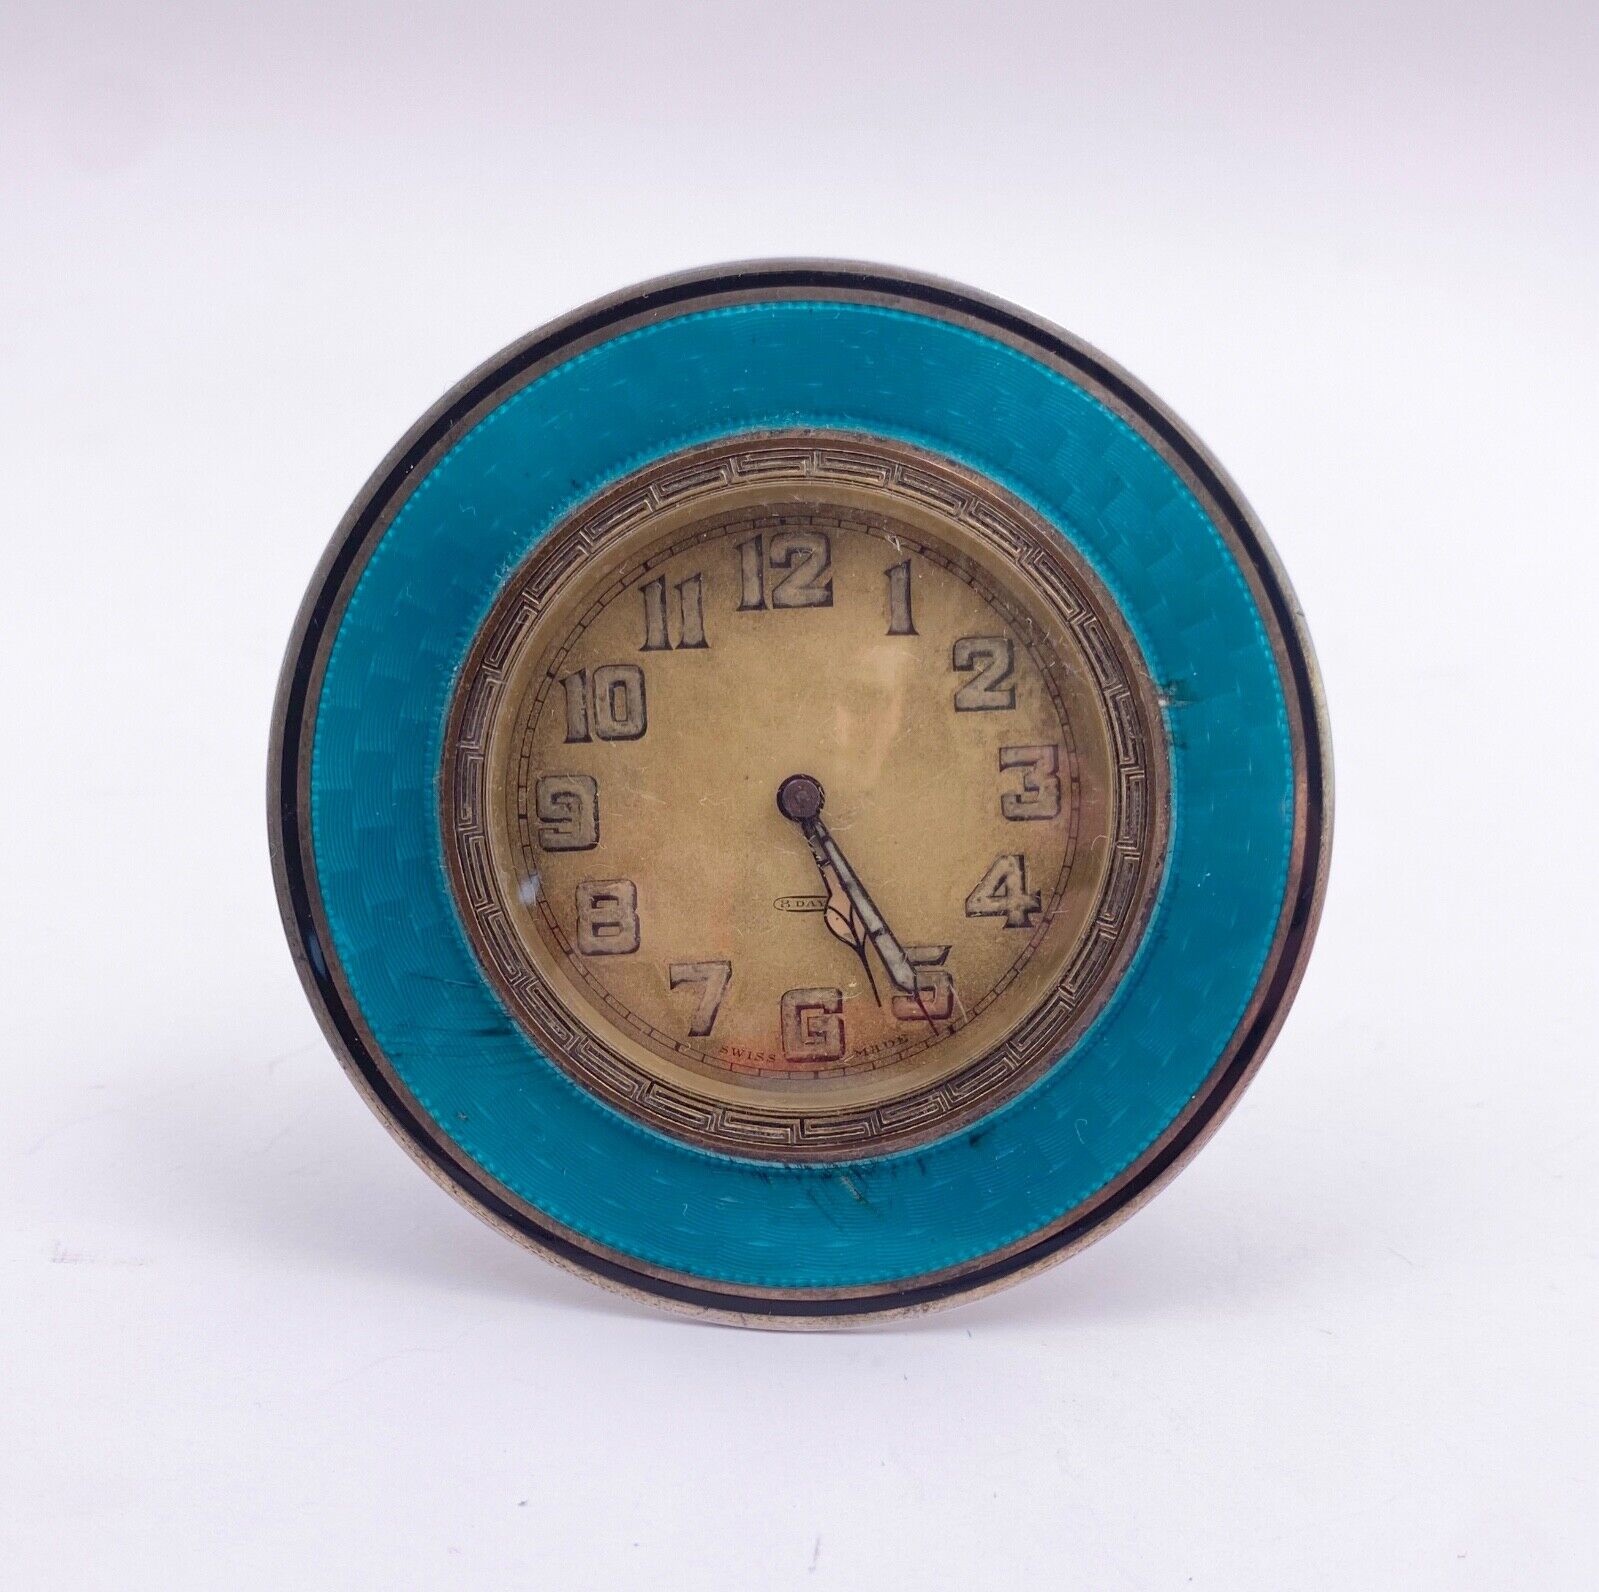 Exceptional Guilloche & Silver Teal Blue Sandoz Swiss Travel Watch Clock W/Stand